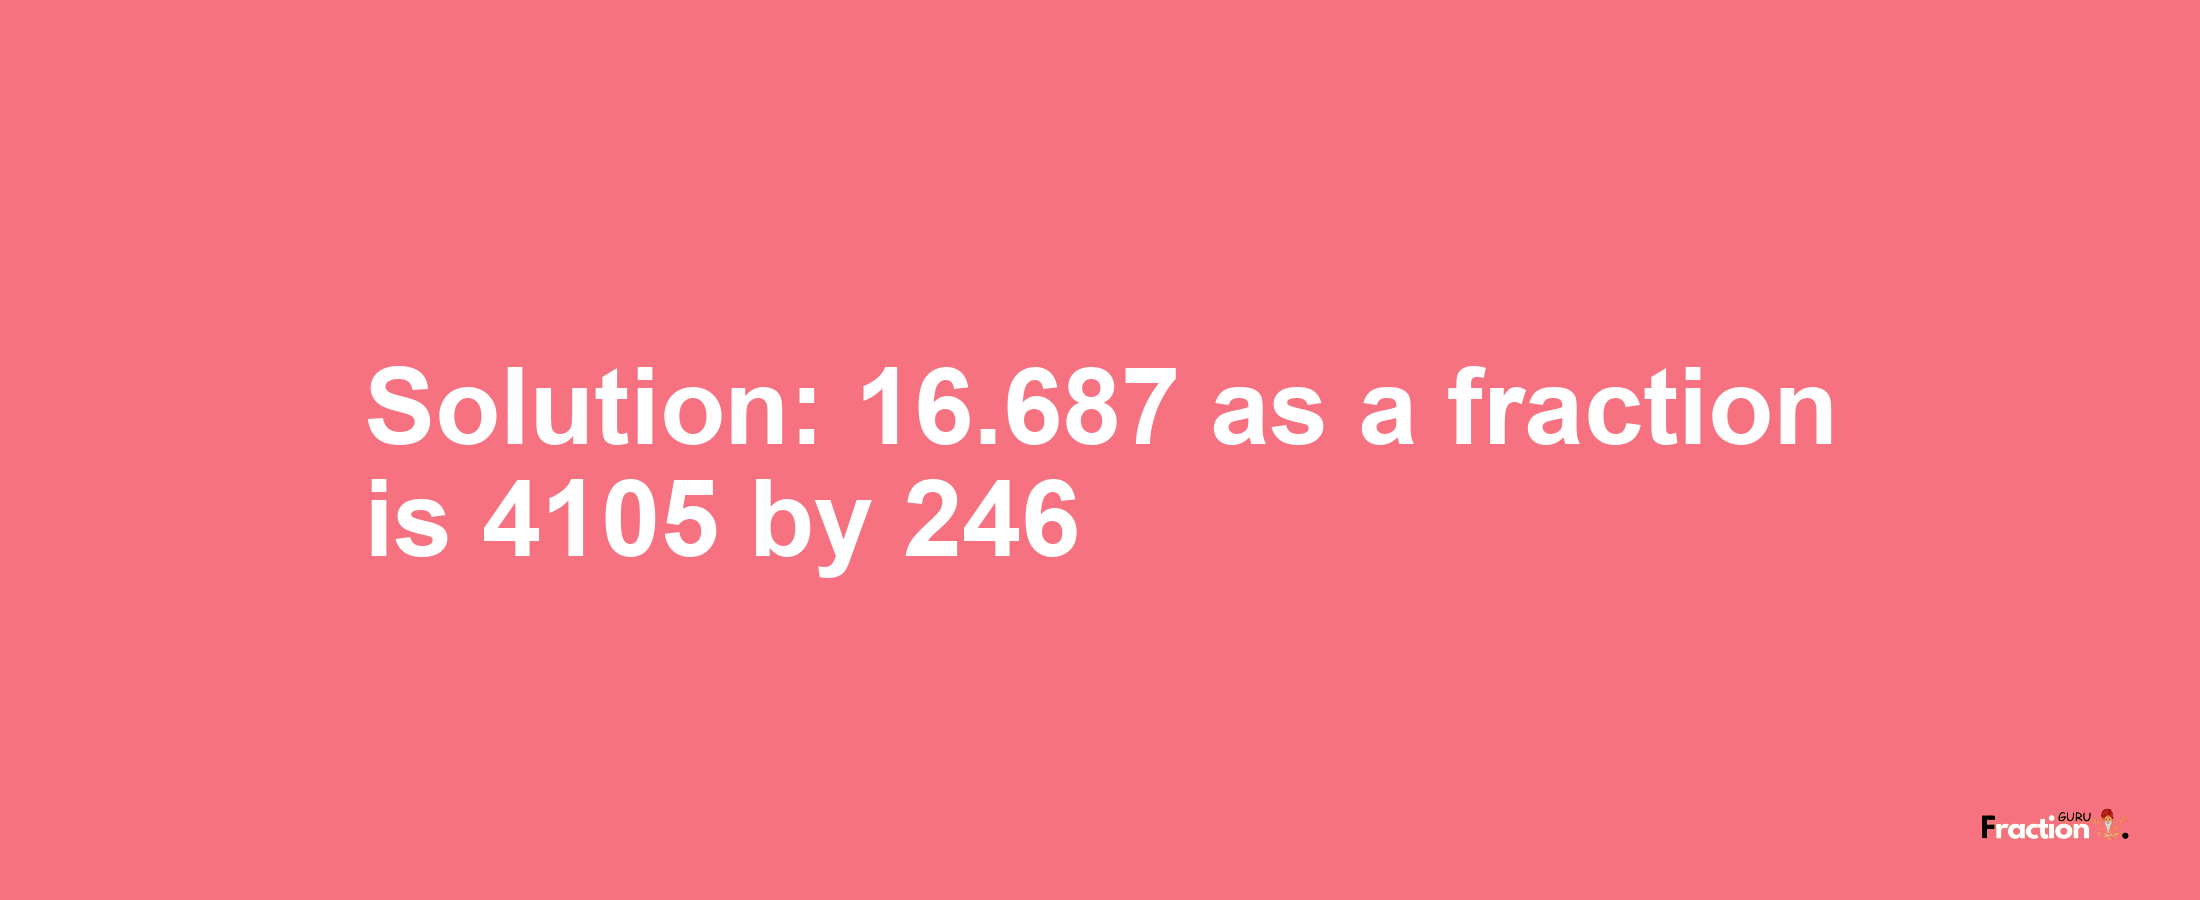 Solution:16.687 as a fraction is 4105/246